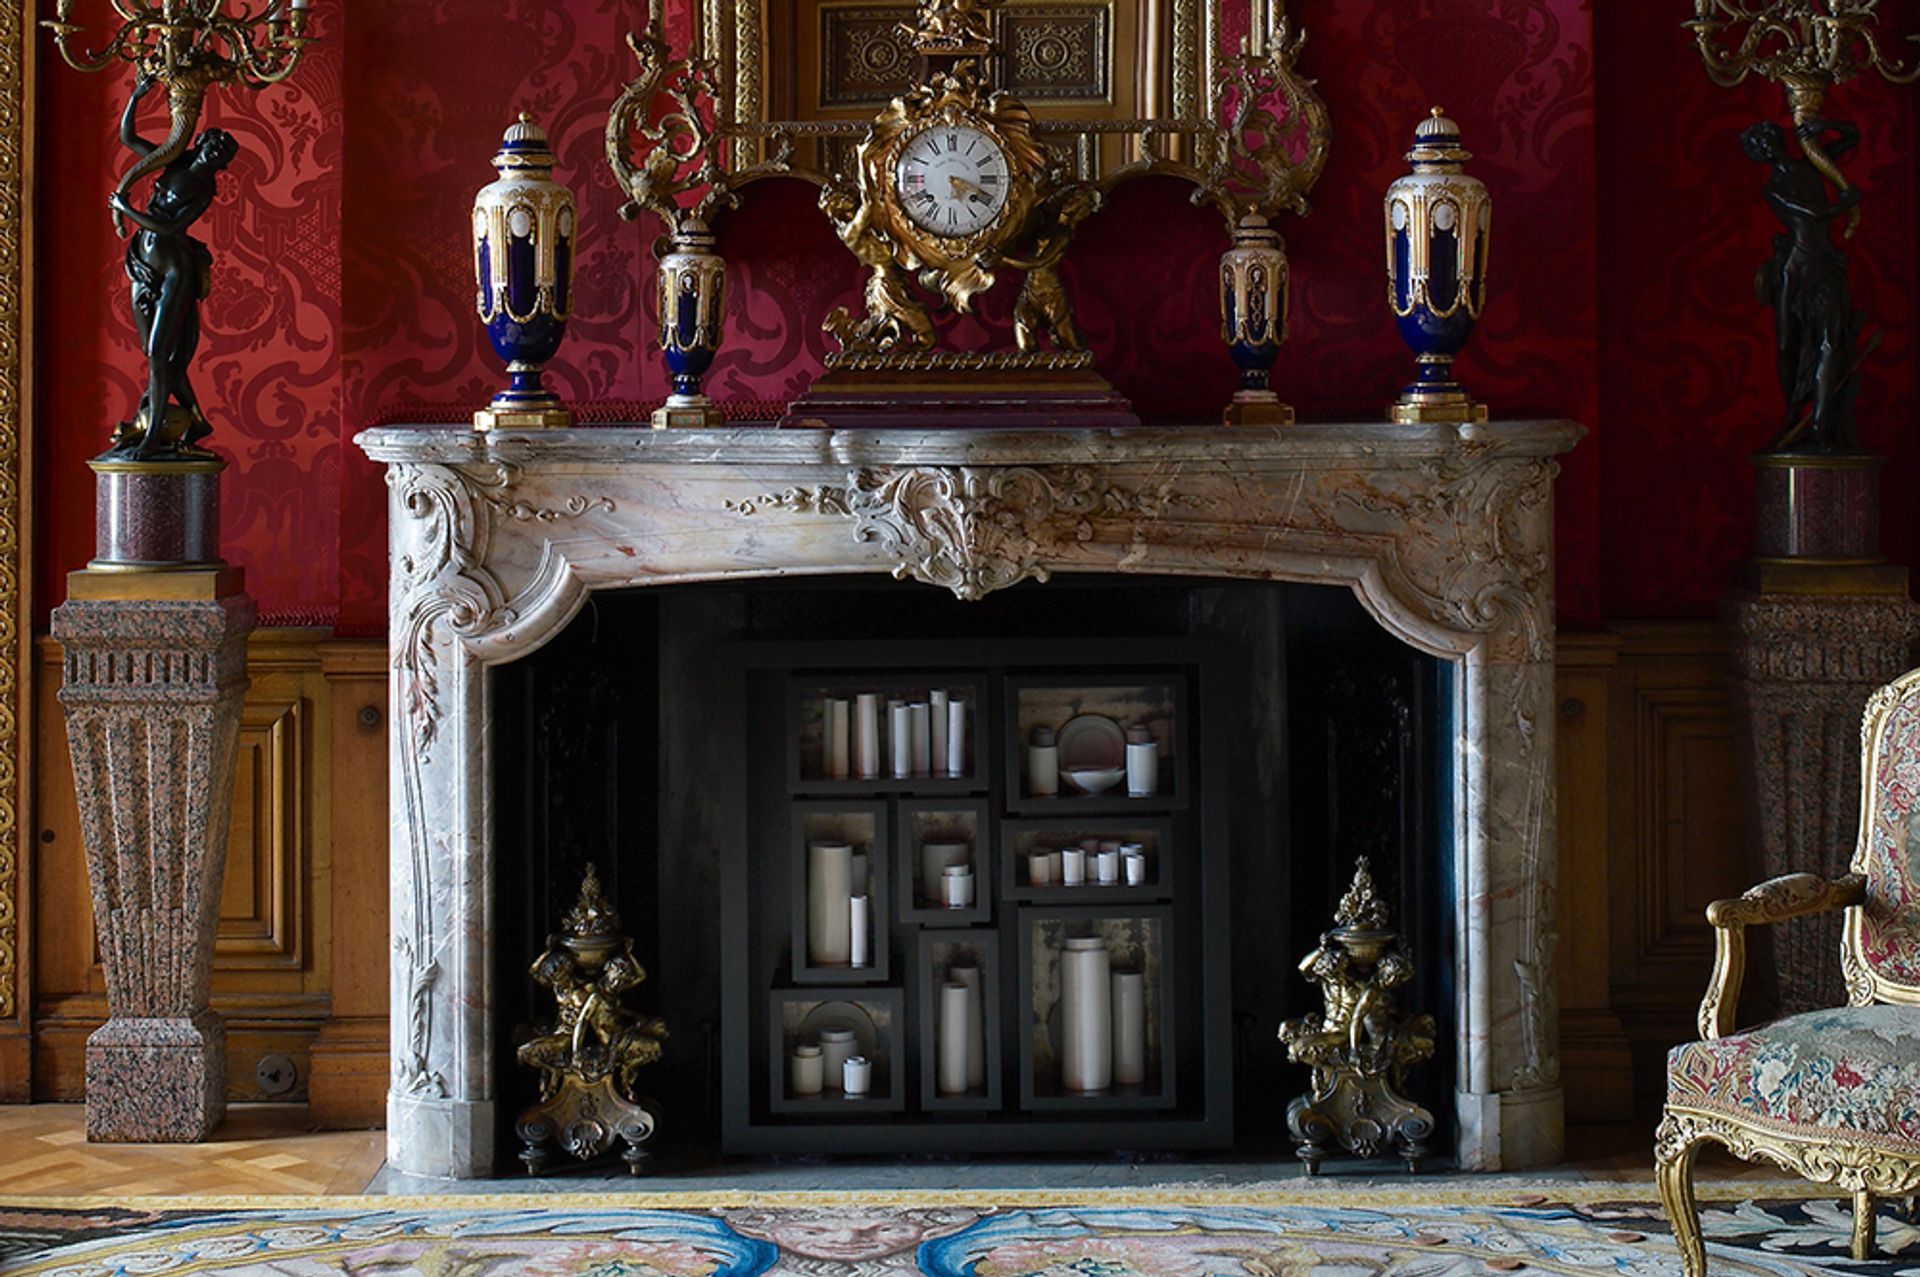 A previous site-specific work by Edmund de Waal, a promise (2012), installed at Waddesdon Manor Photo: Paul Barker, 2012